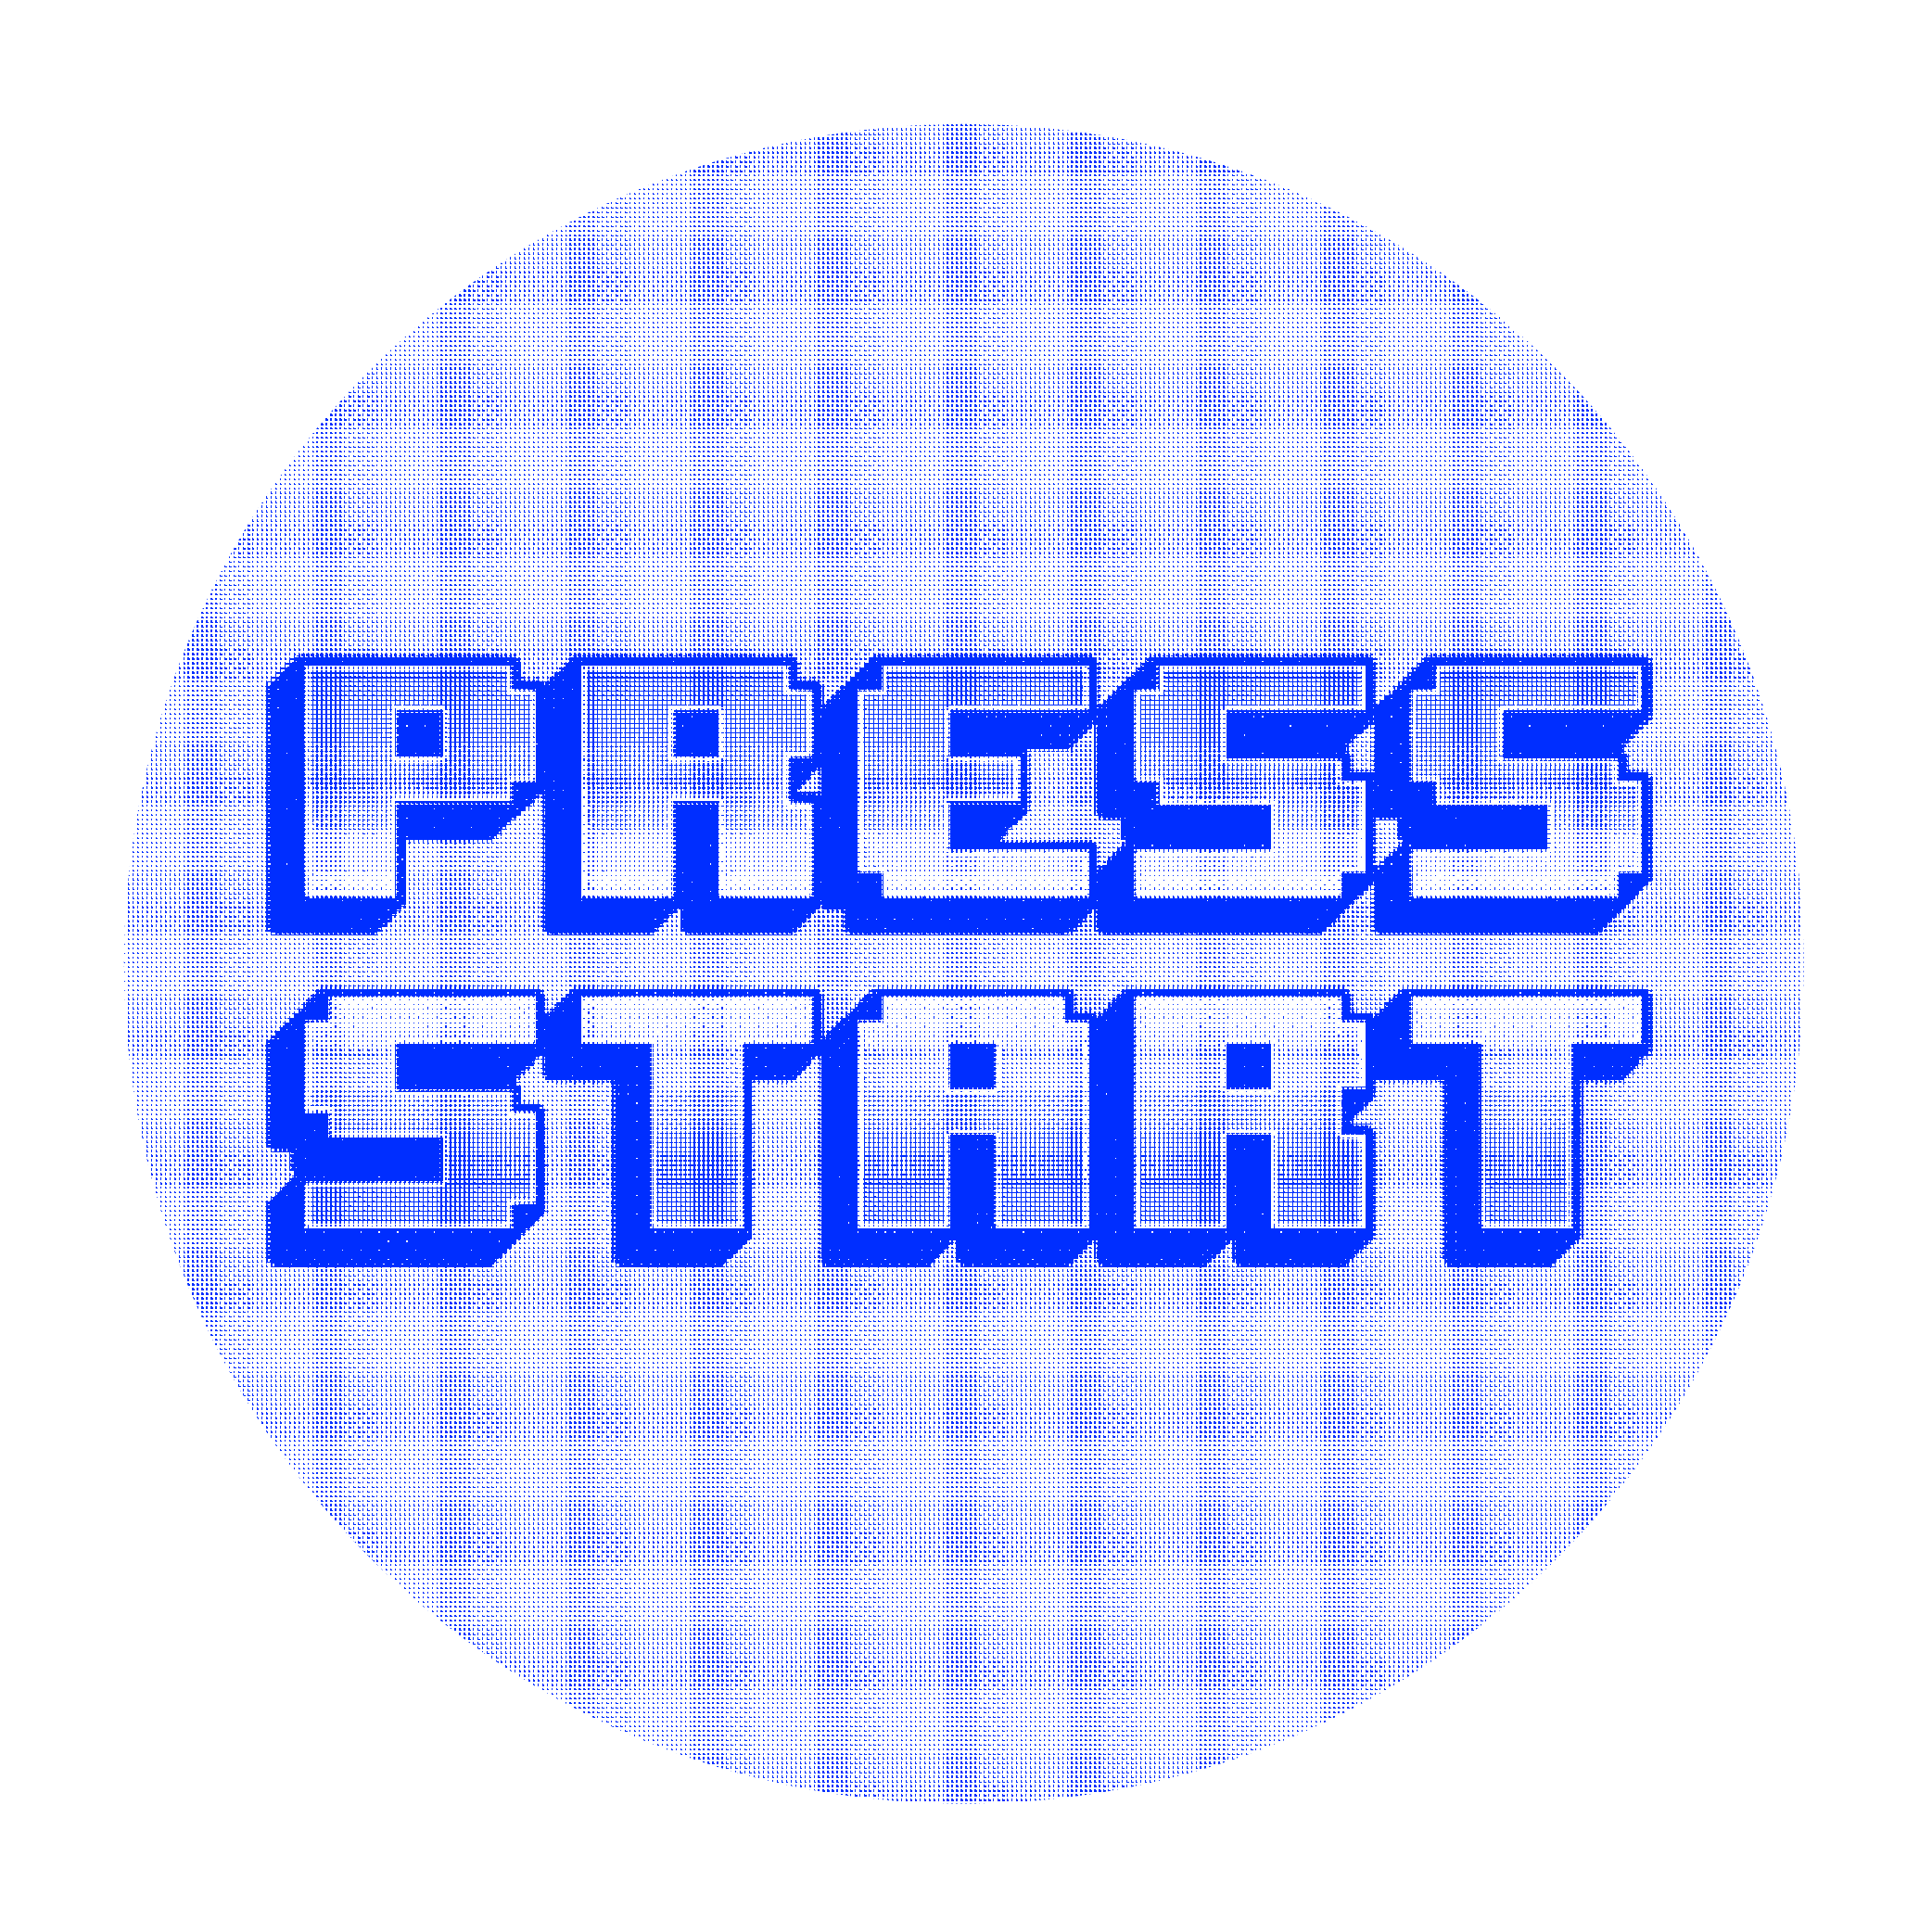 Classic retro text from an arcade game saying 'PRESS START', giving instruction of how to start the game.